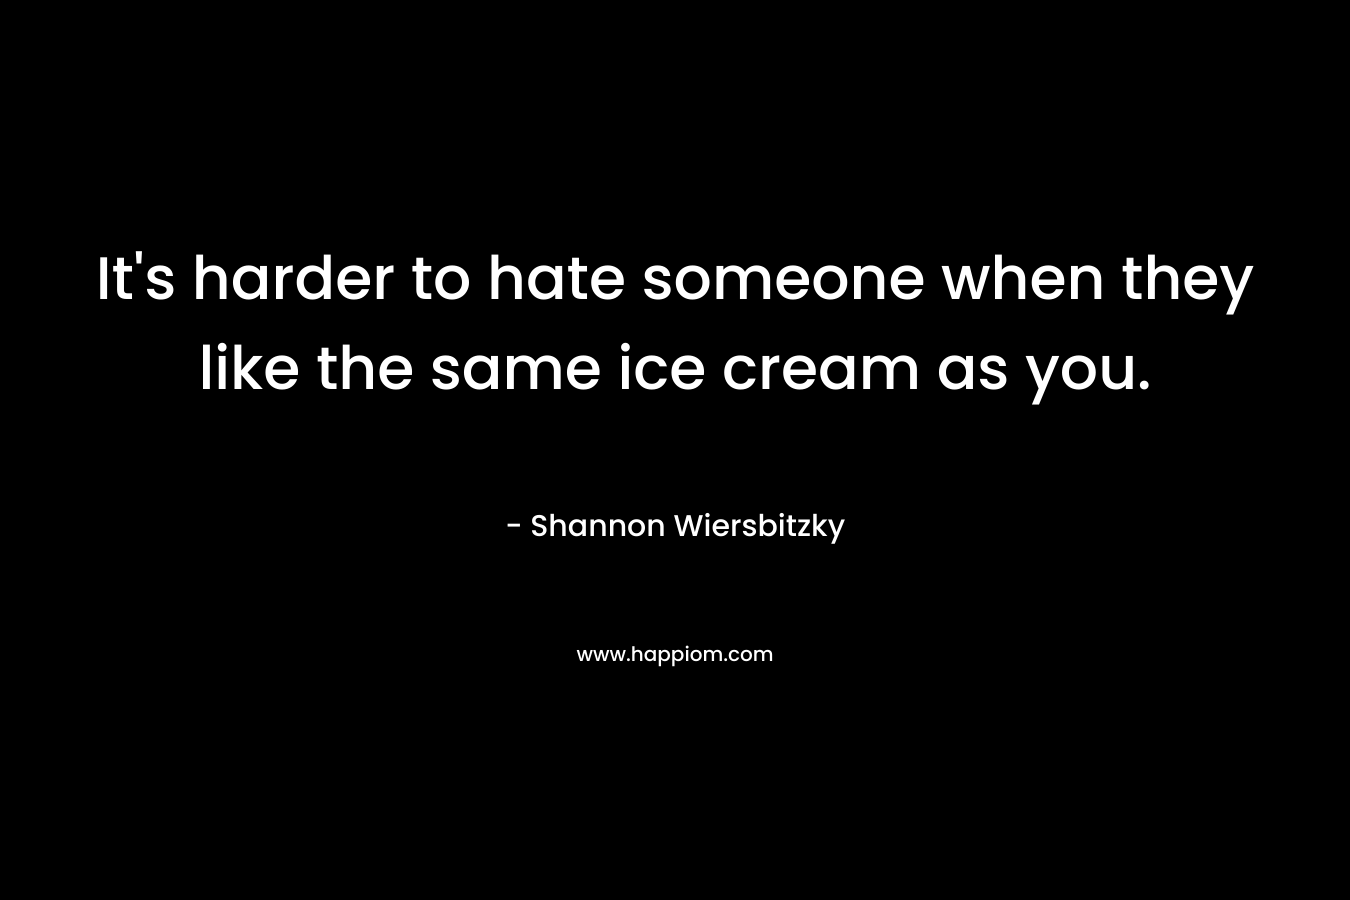 It's harder to hate someone when they like the same ice cream as you.